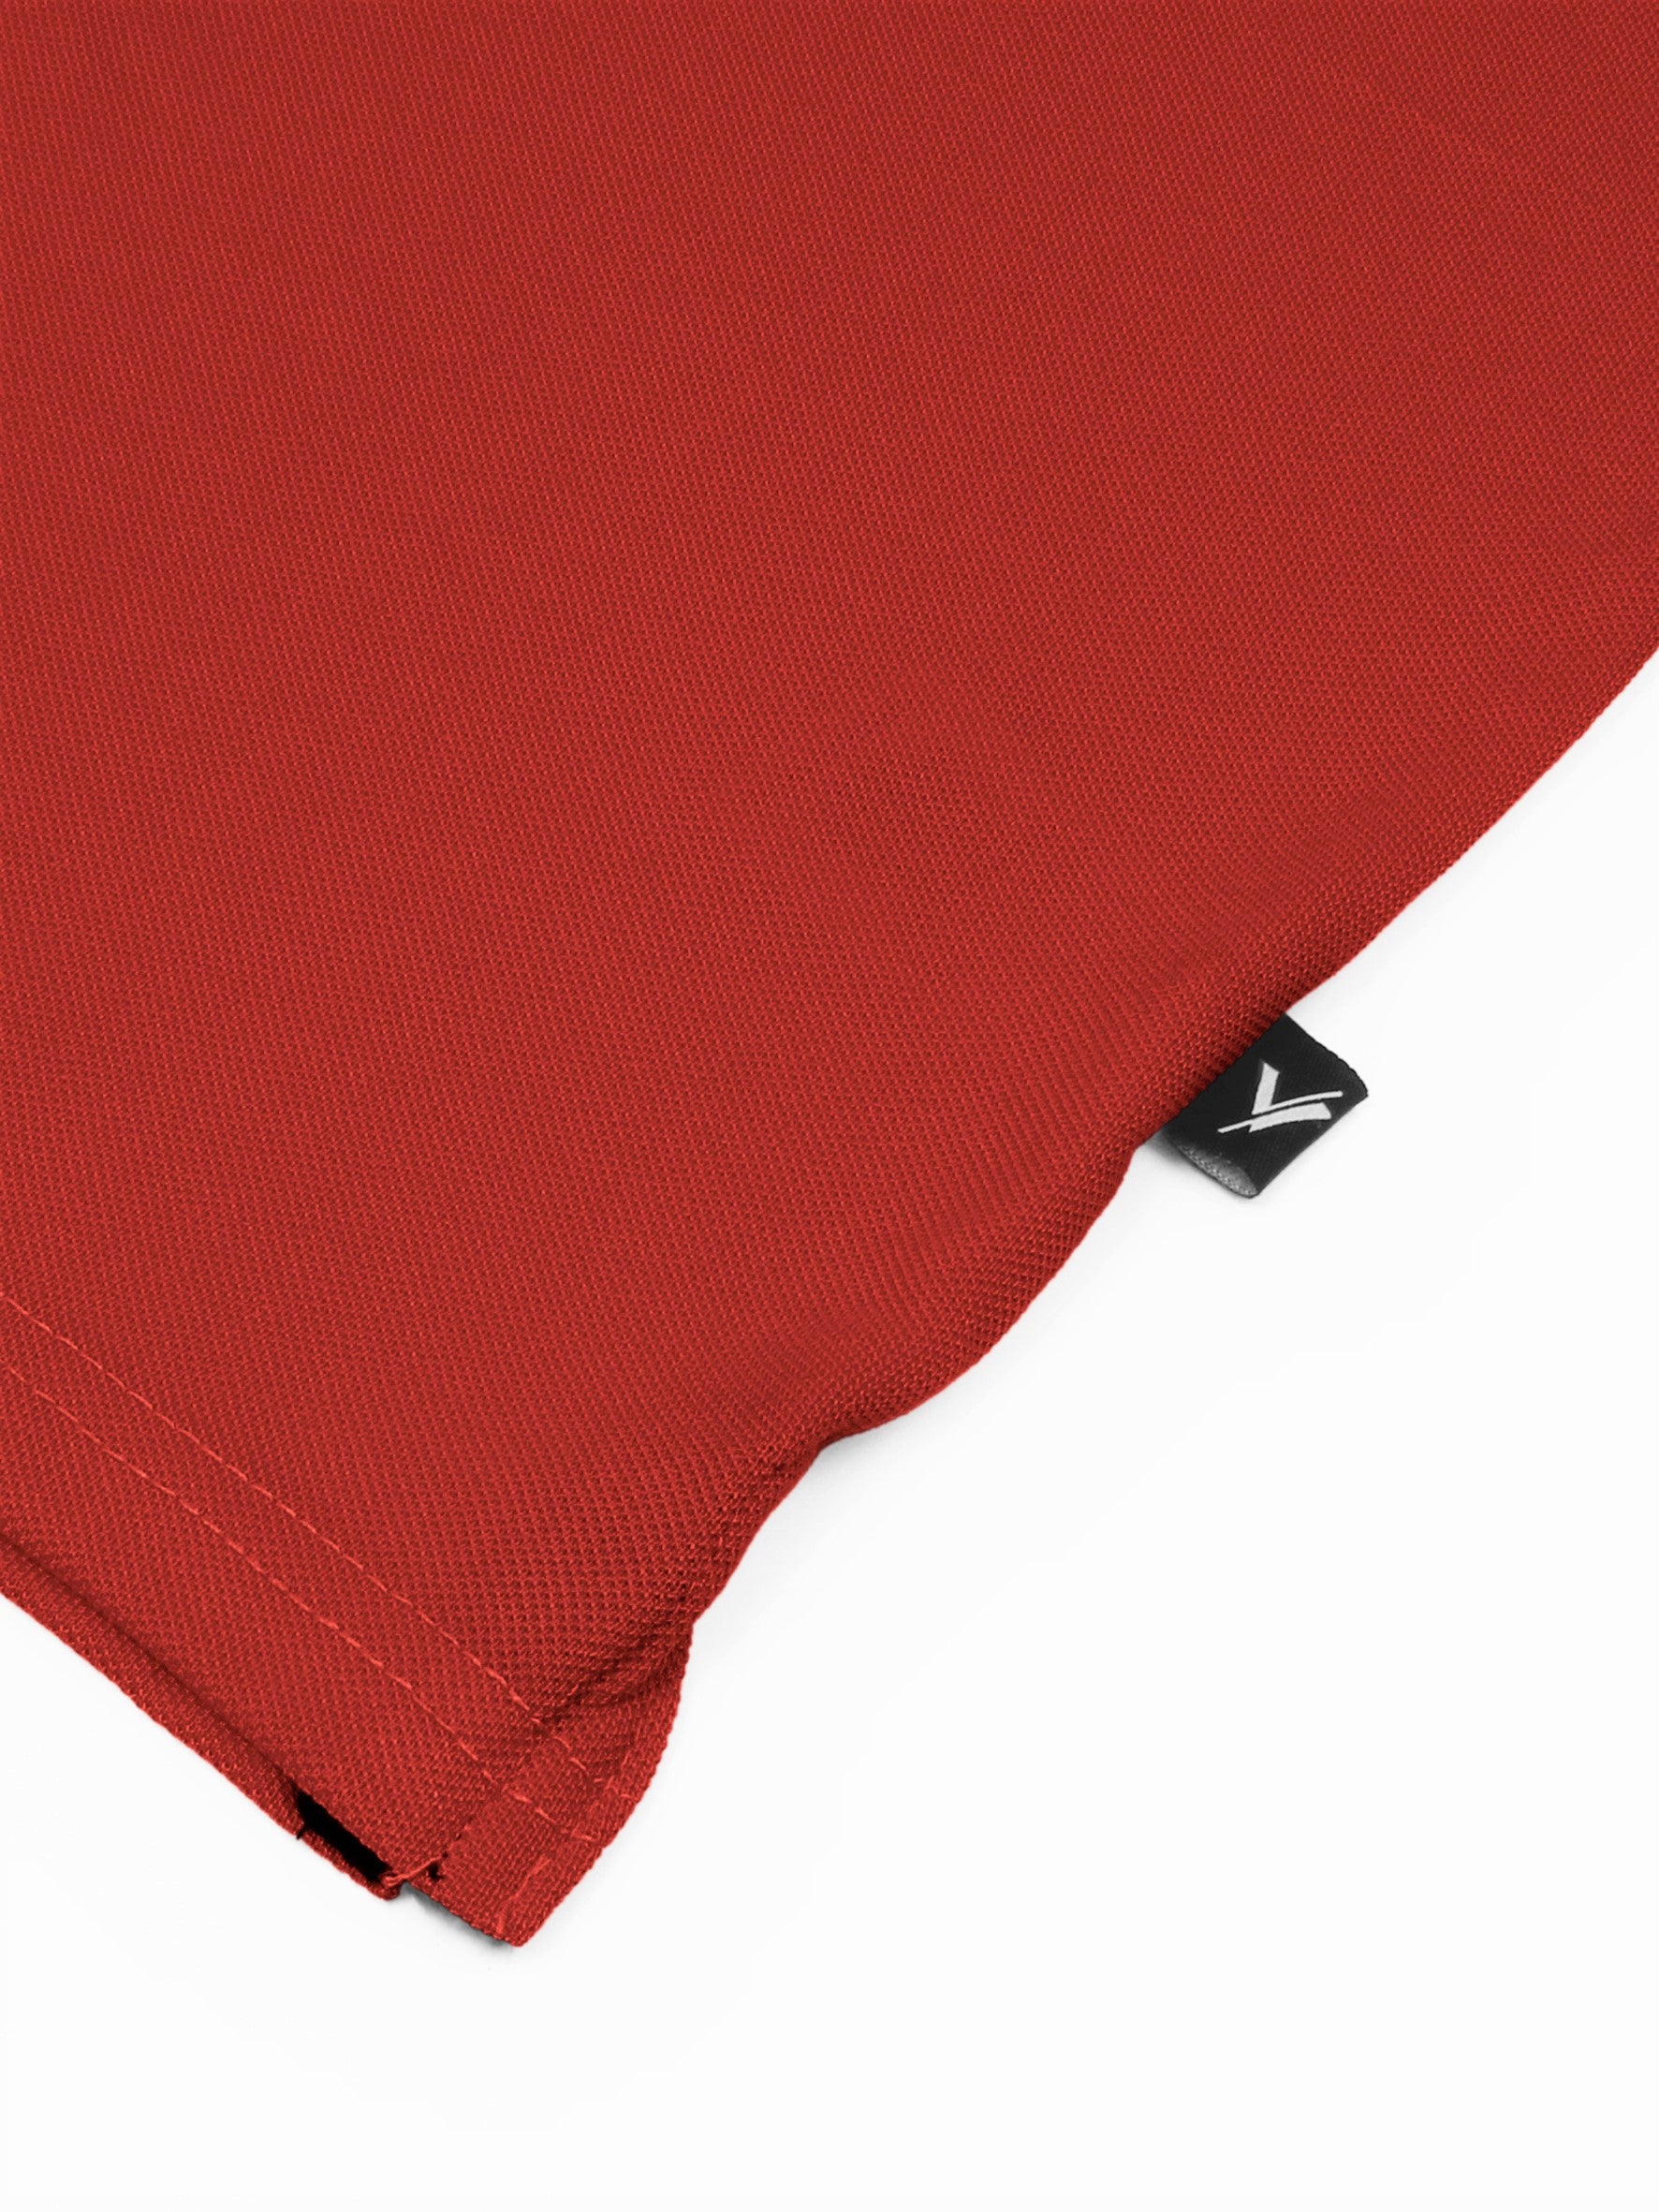 Tipping Collar Polo Shirt For Boys Plain Red